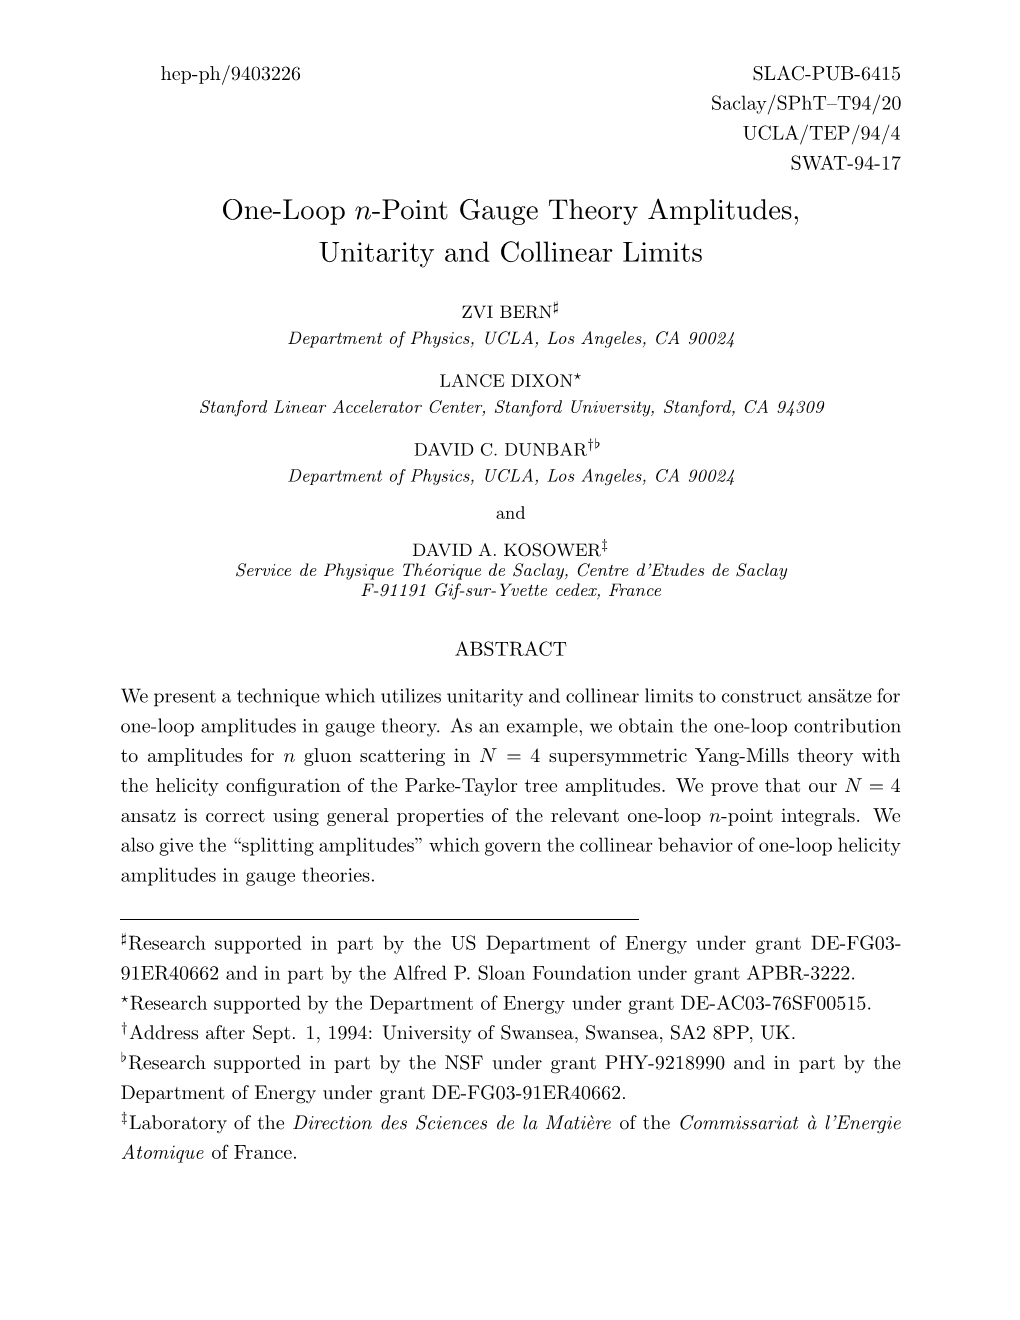 One-Loop N-Point Gauge Theory Amplitudes, Unitarity and Collinear Limits